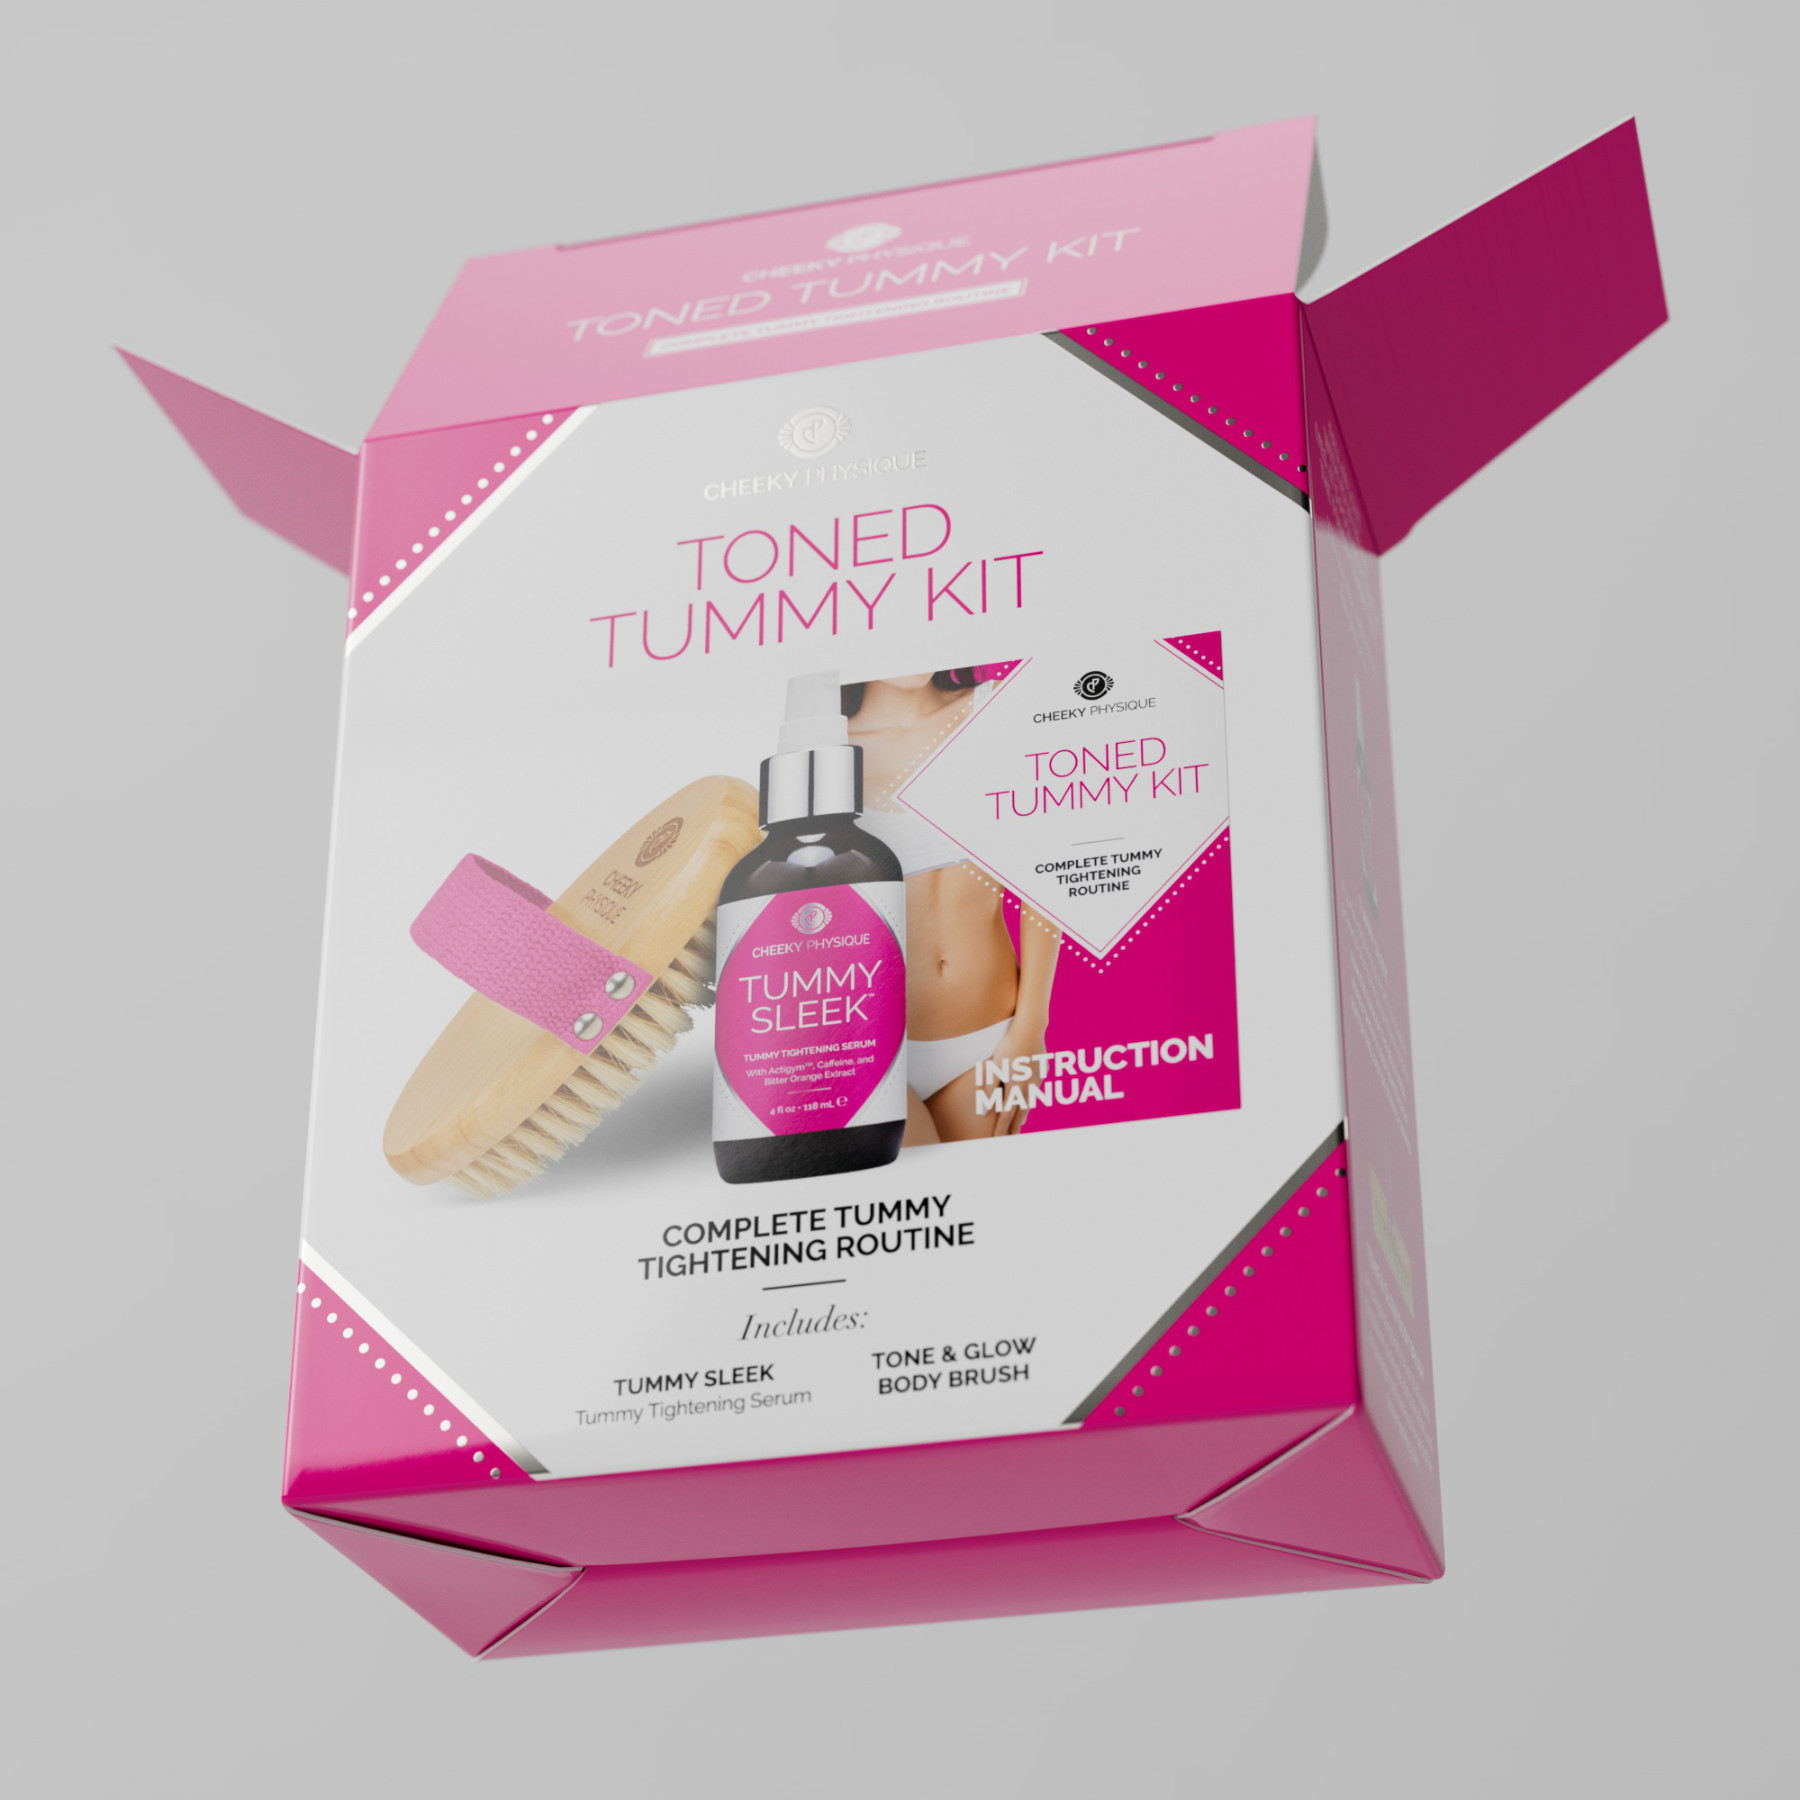 Toned Tummy Kit Package